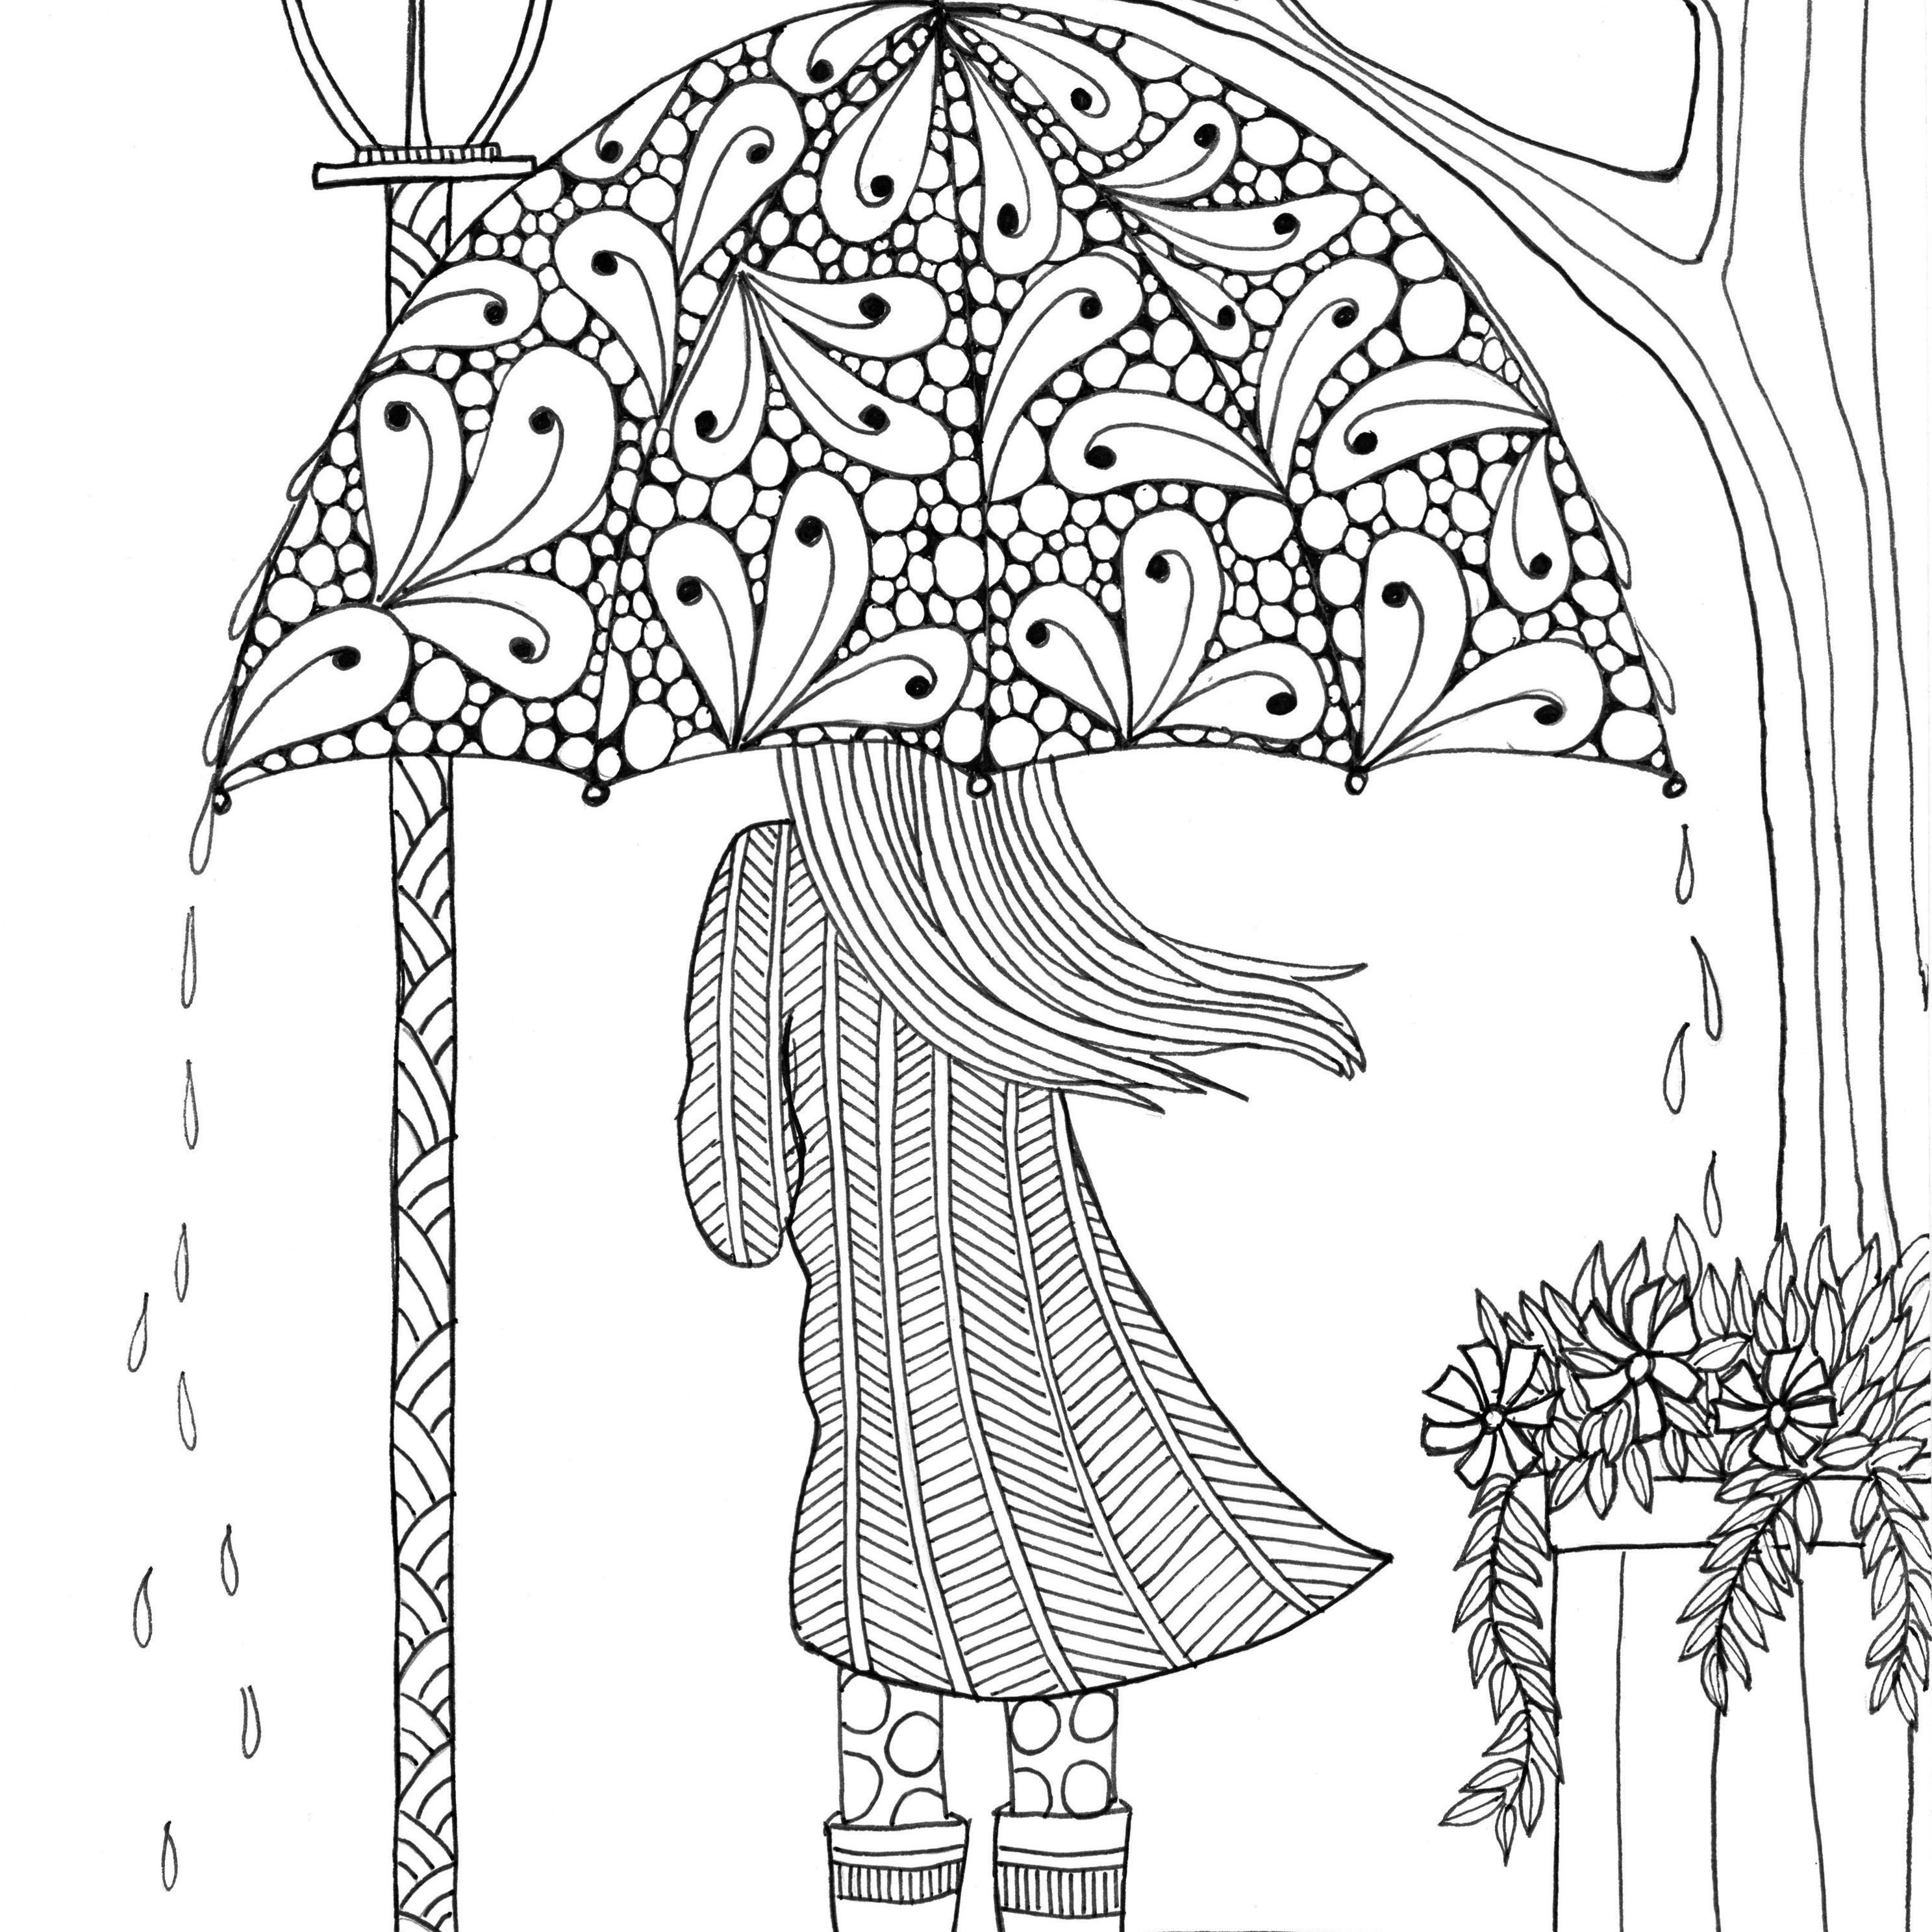 Art Coloring Pages For Adults Free Printable Coloring Pages For Adults